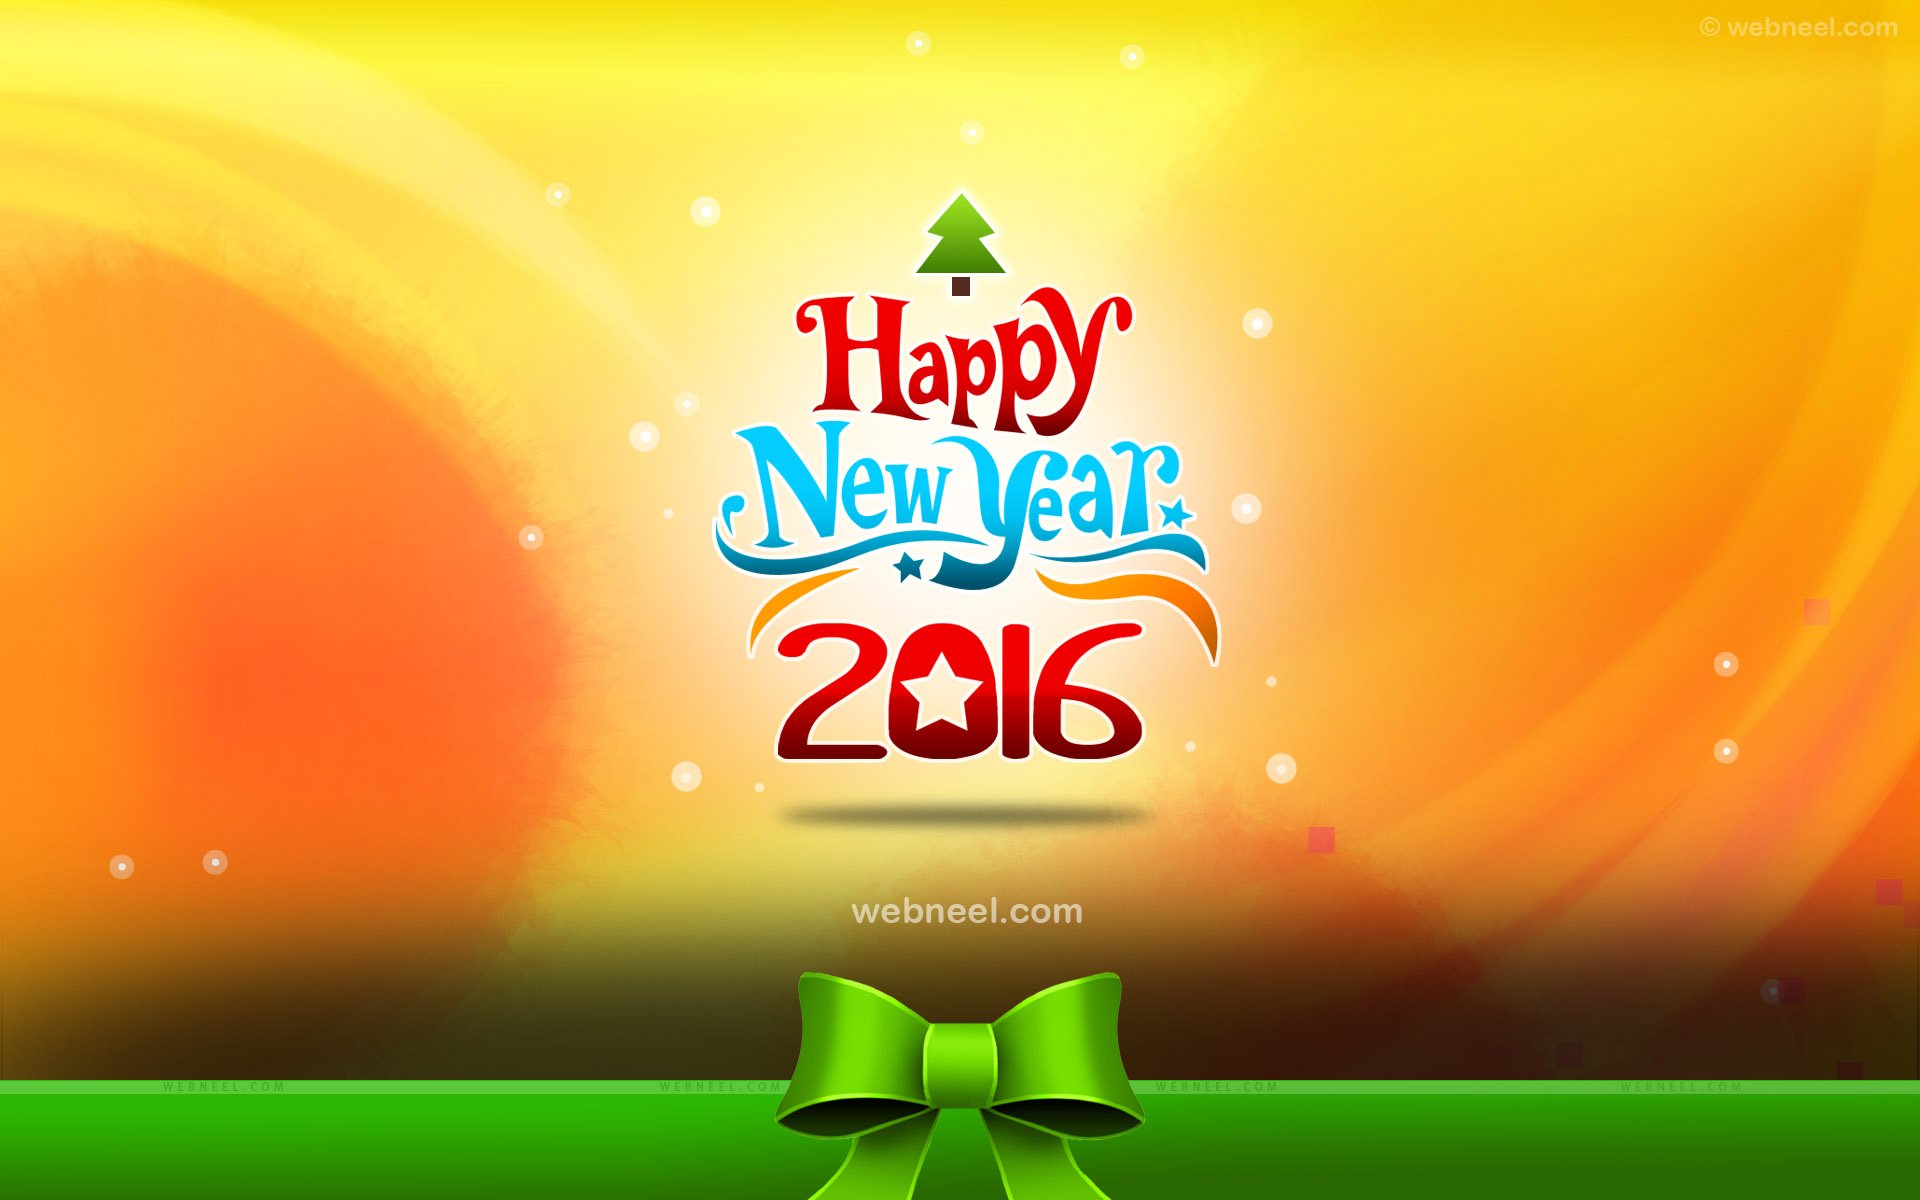 Happy New Year Wallpapers 2016   Images and Graphics